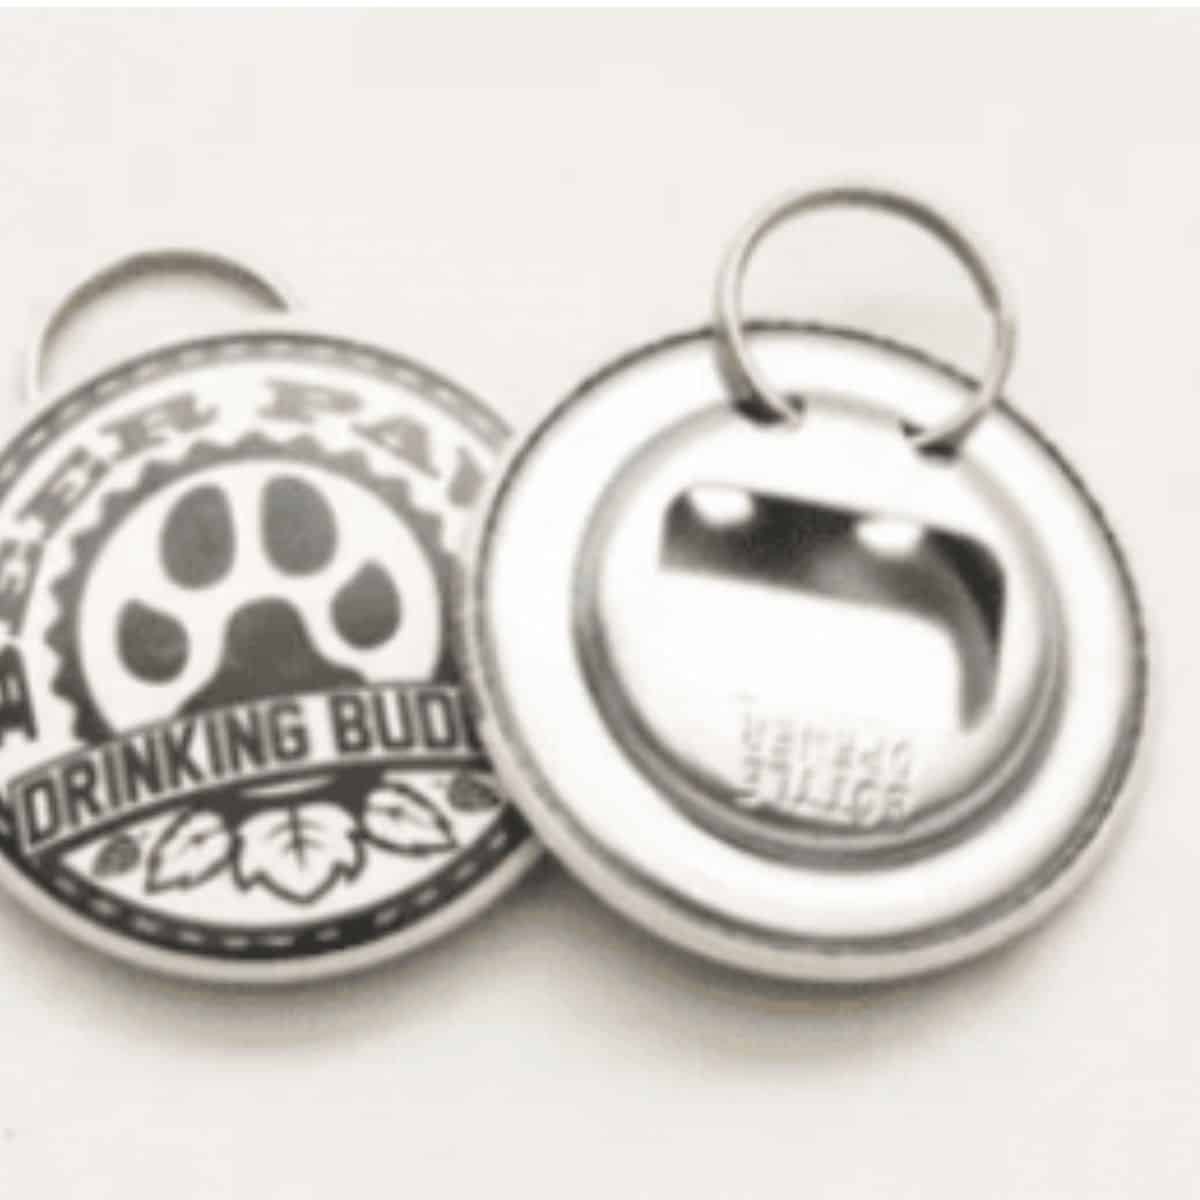 Small keychain bottle opener that is round and goes on a leash and says drinking buddy,